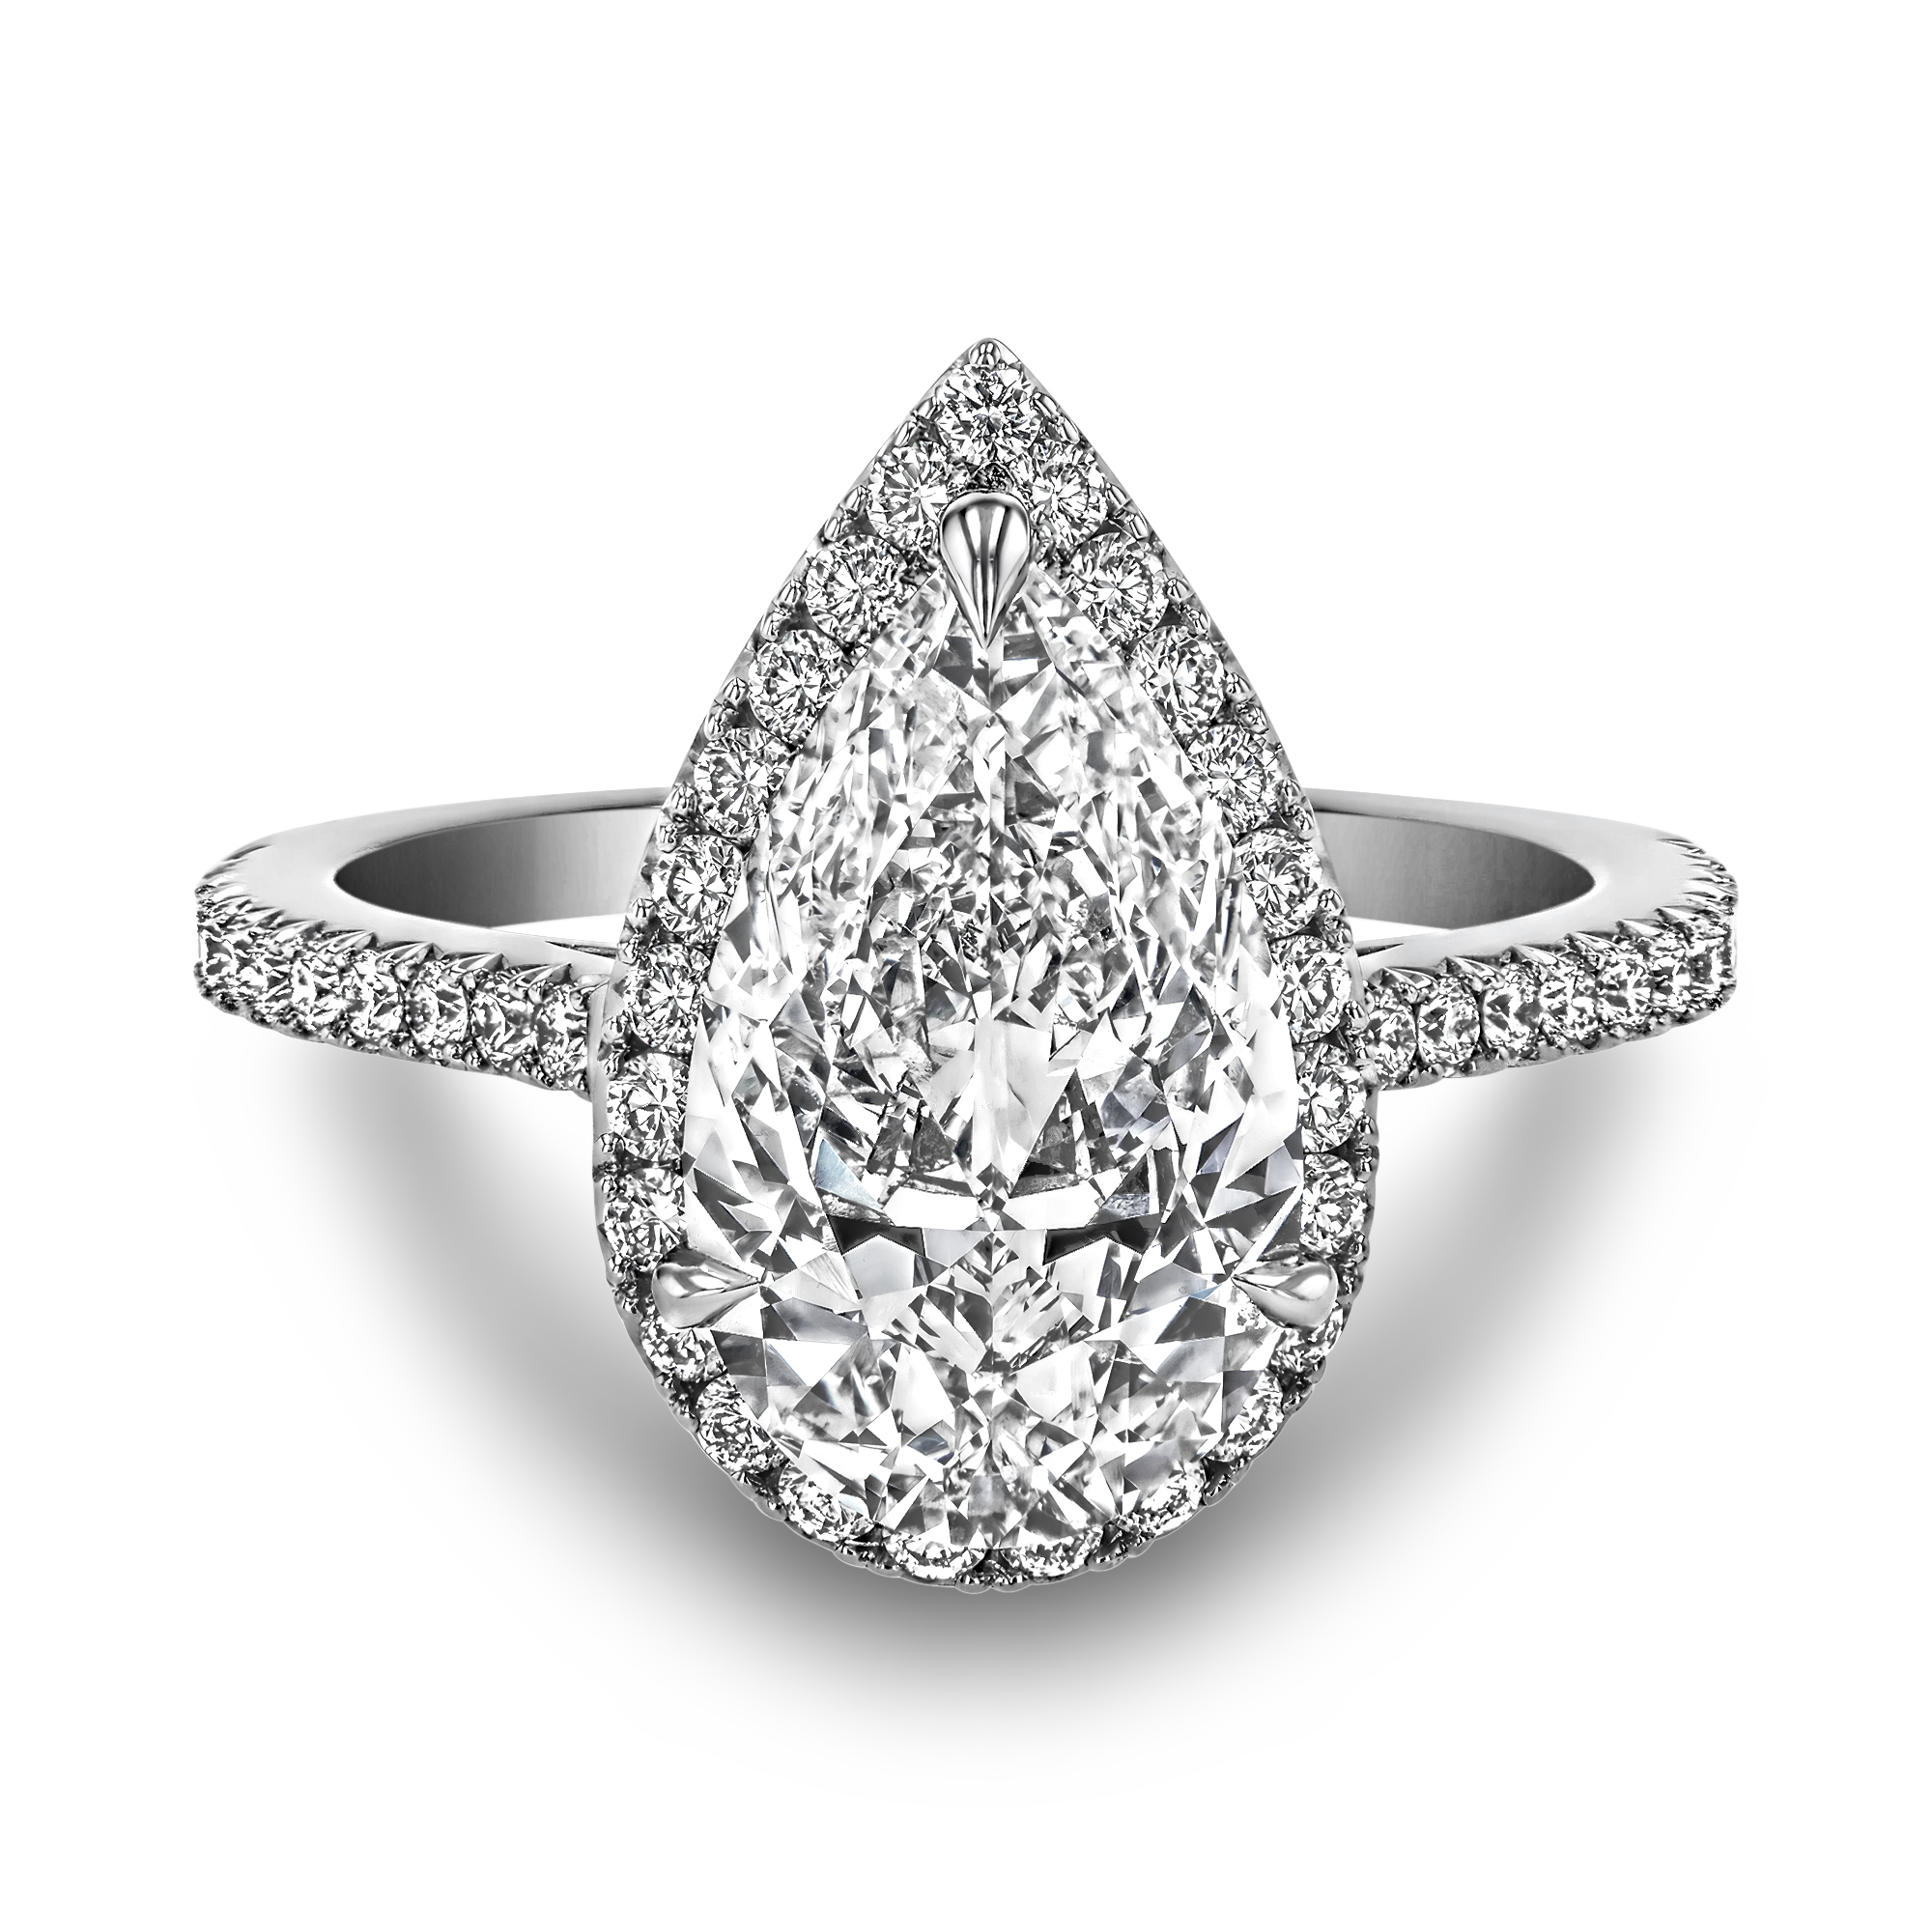 Pearshape 3.02ct Diamond Cluster Ring Pearshape, Claw Set_2